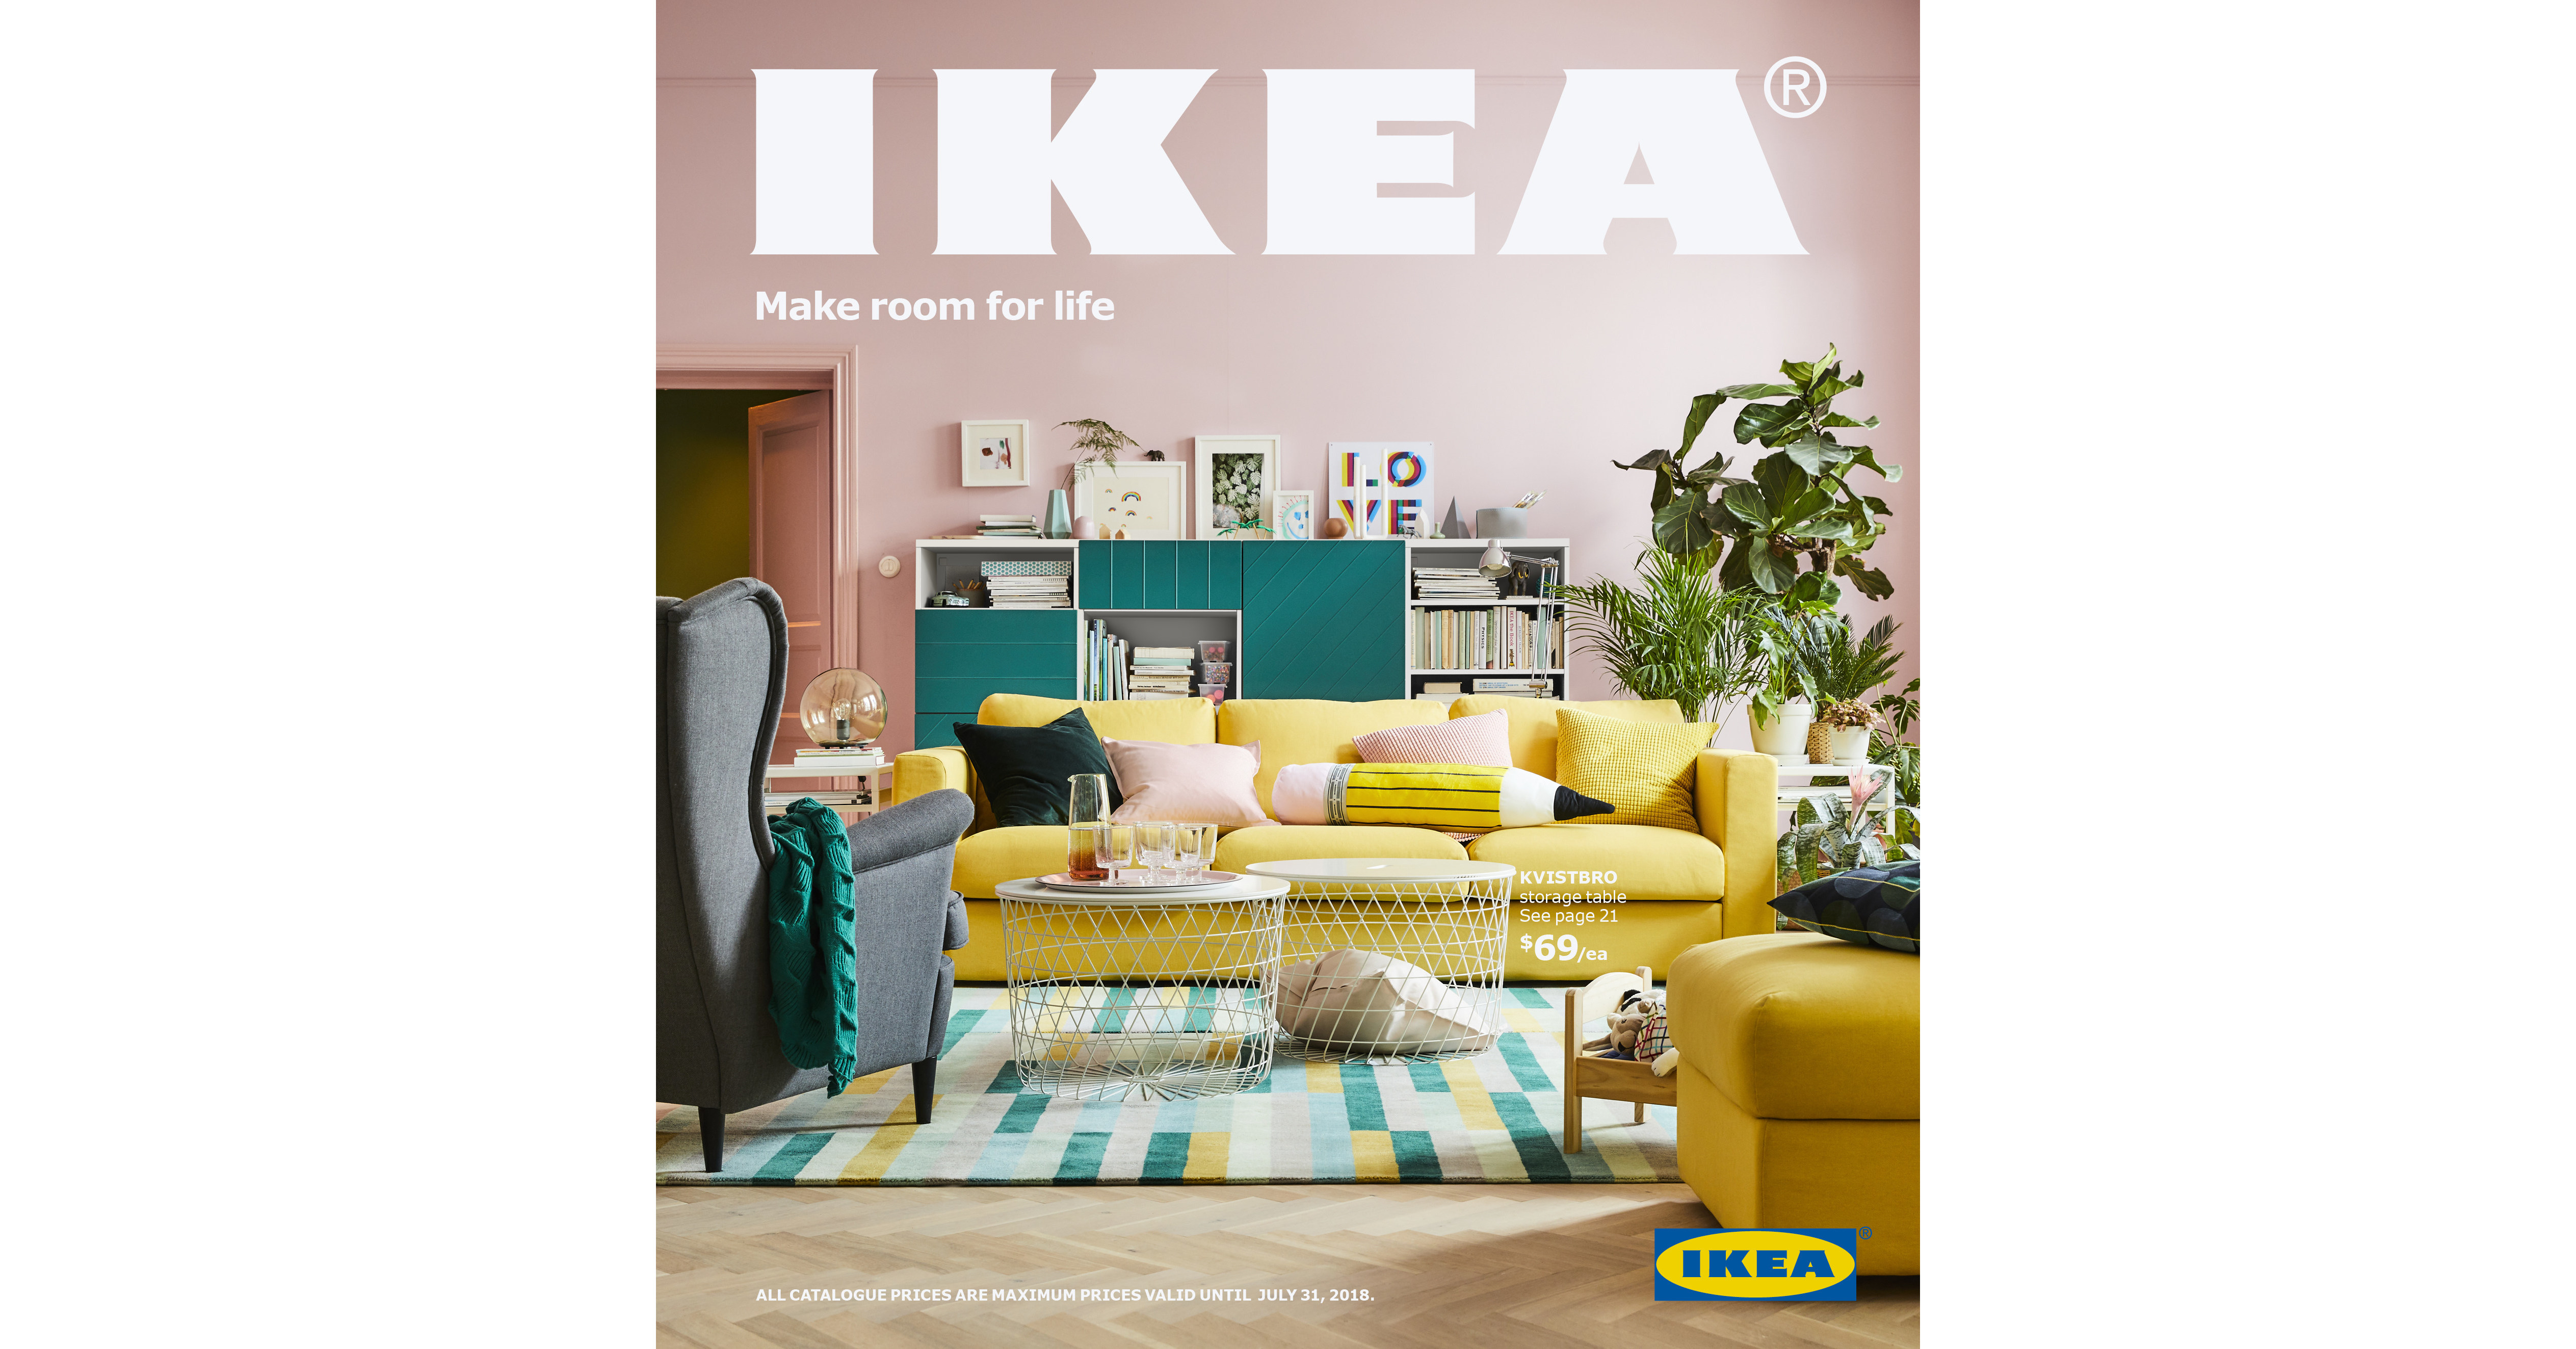 IKEA Canada 2018 IKEA Catalogue Set To Land In Mailboxes Across ?p=facebook